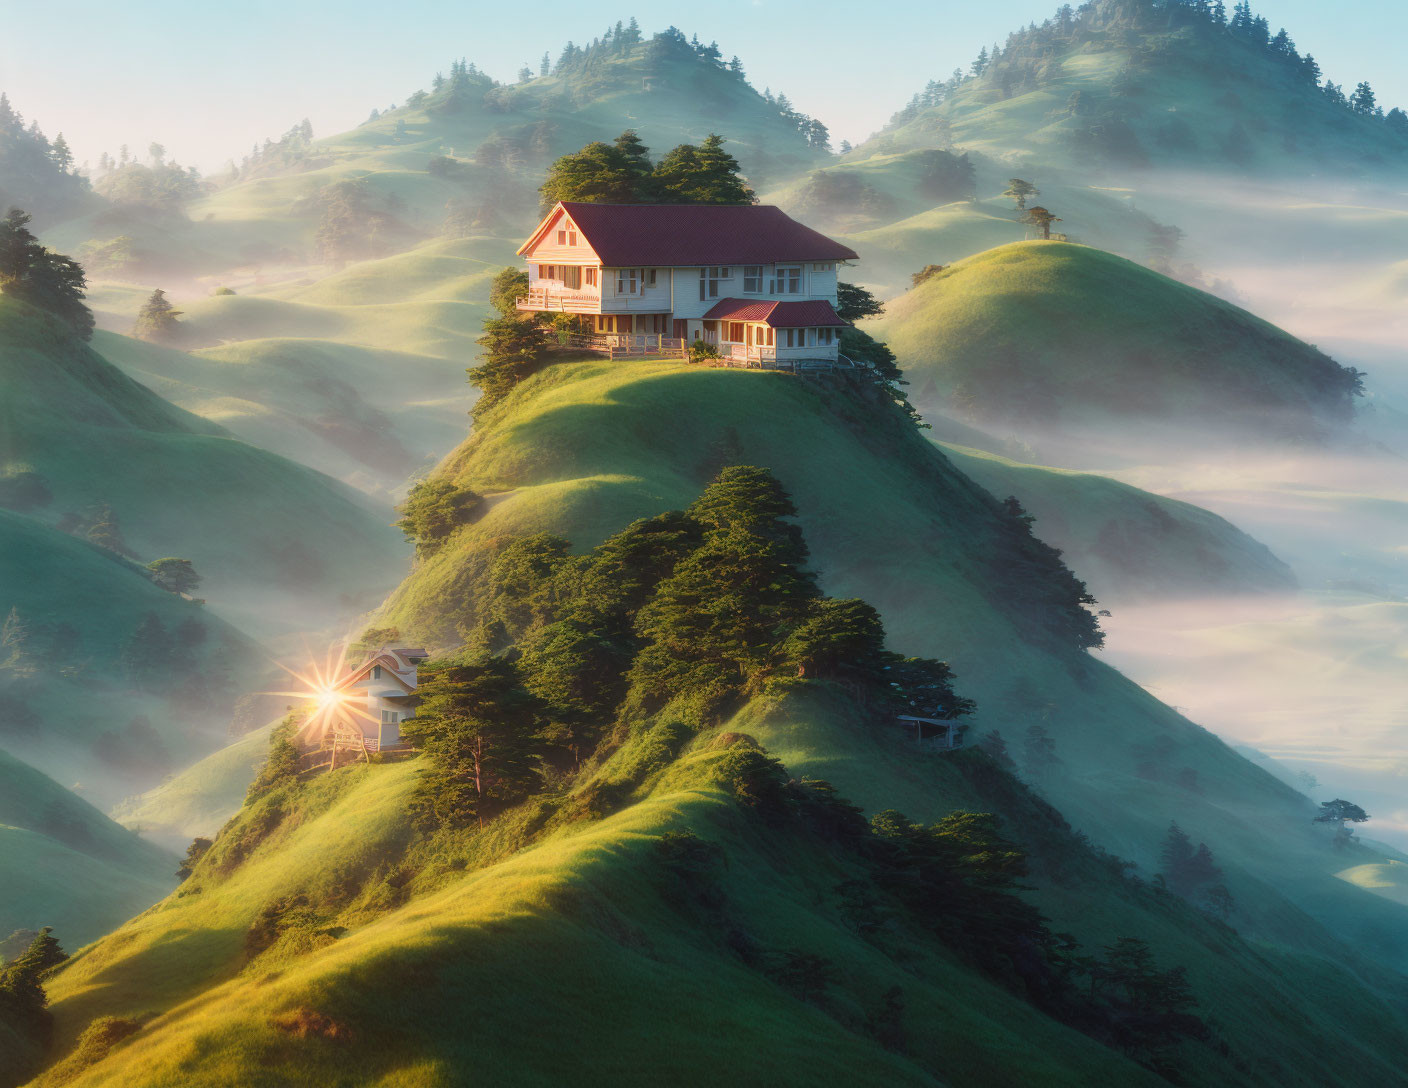 Sunrise view of misty hilltop house and rolling hills with sunbeams.